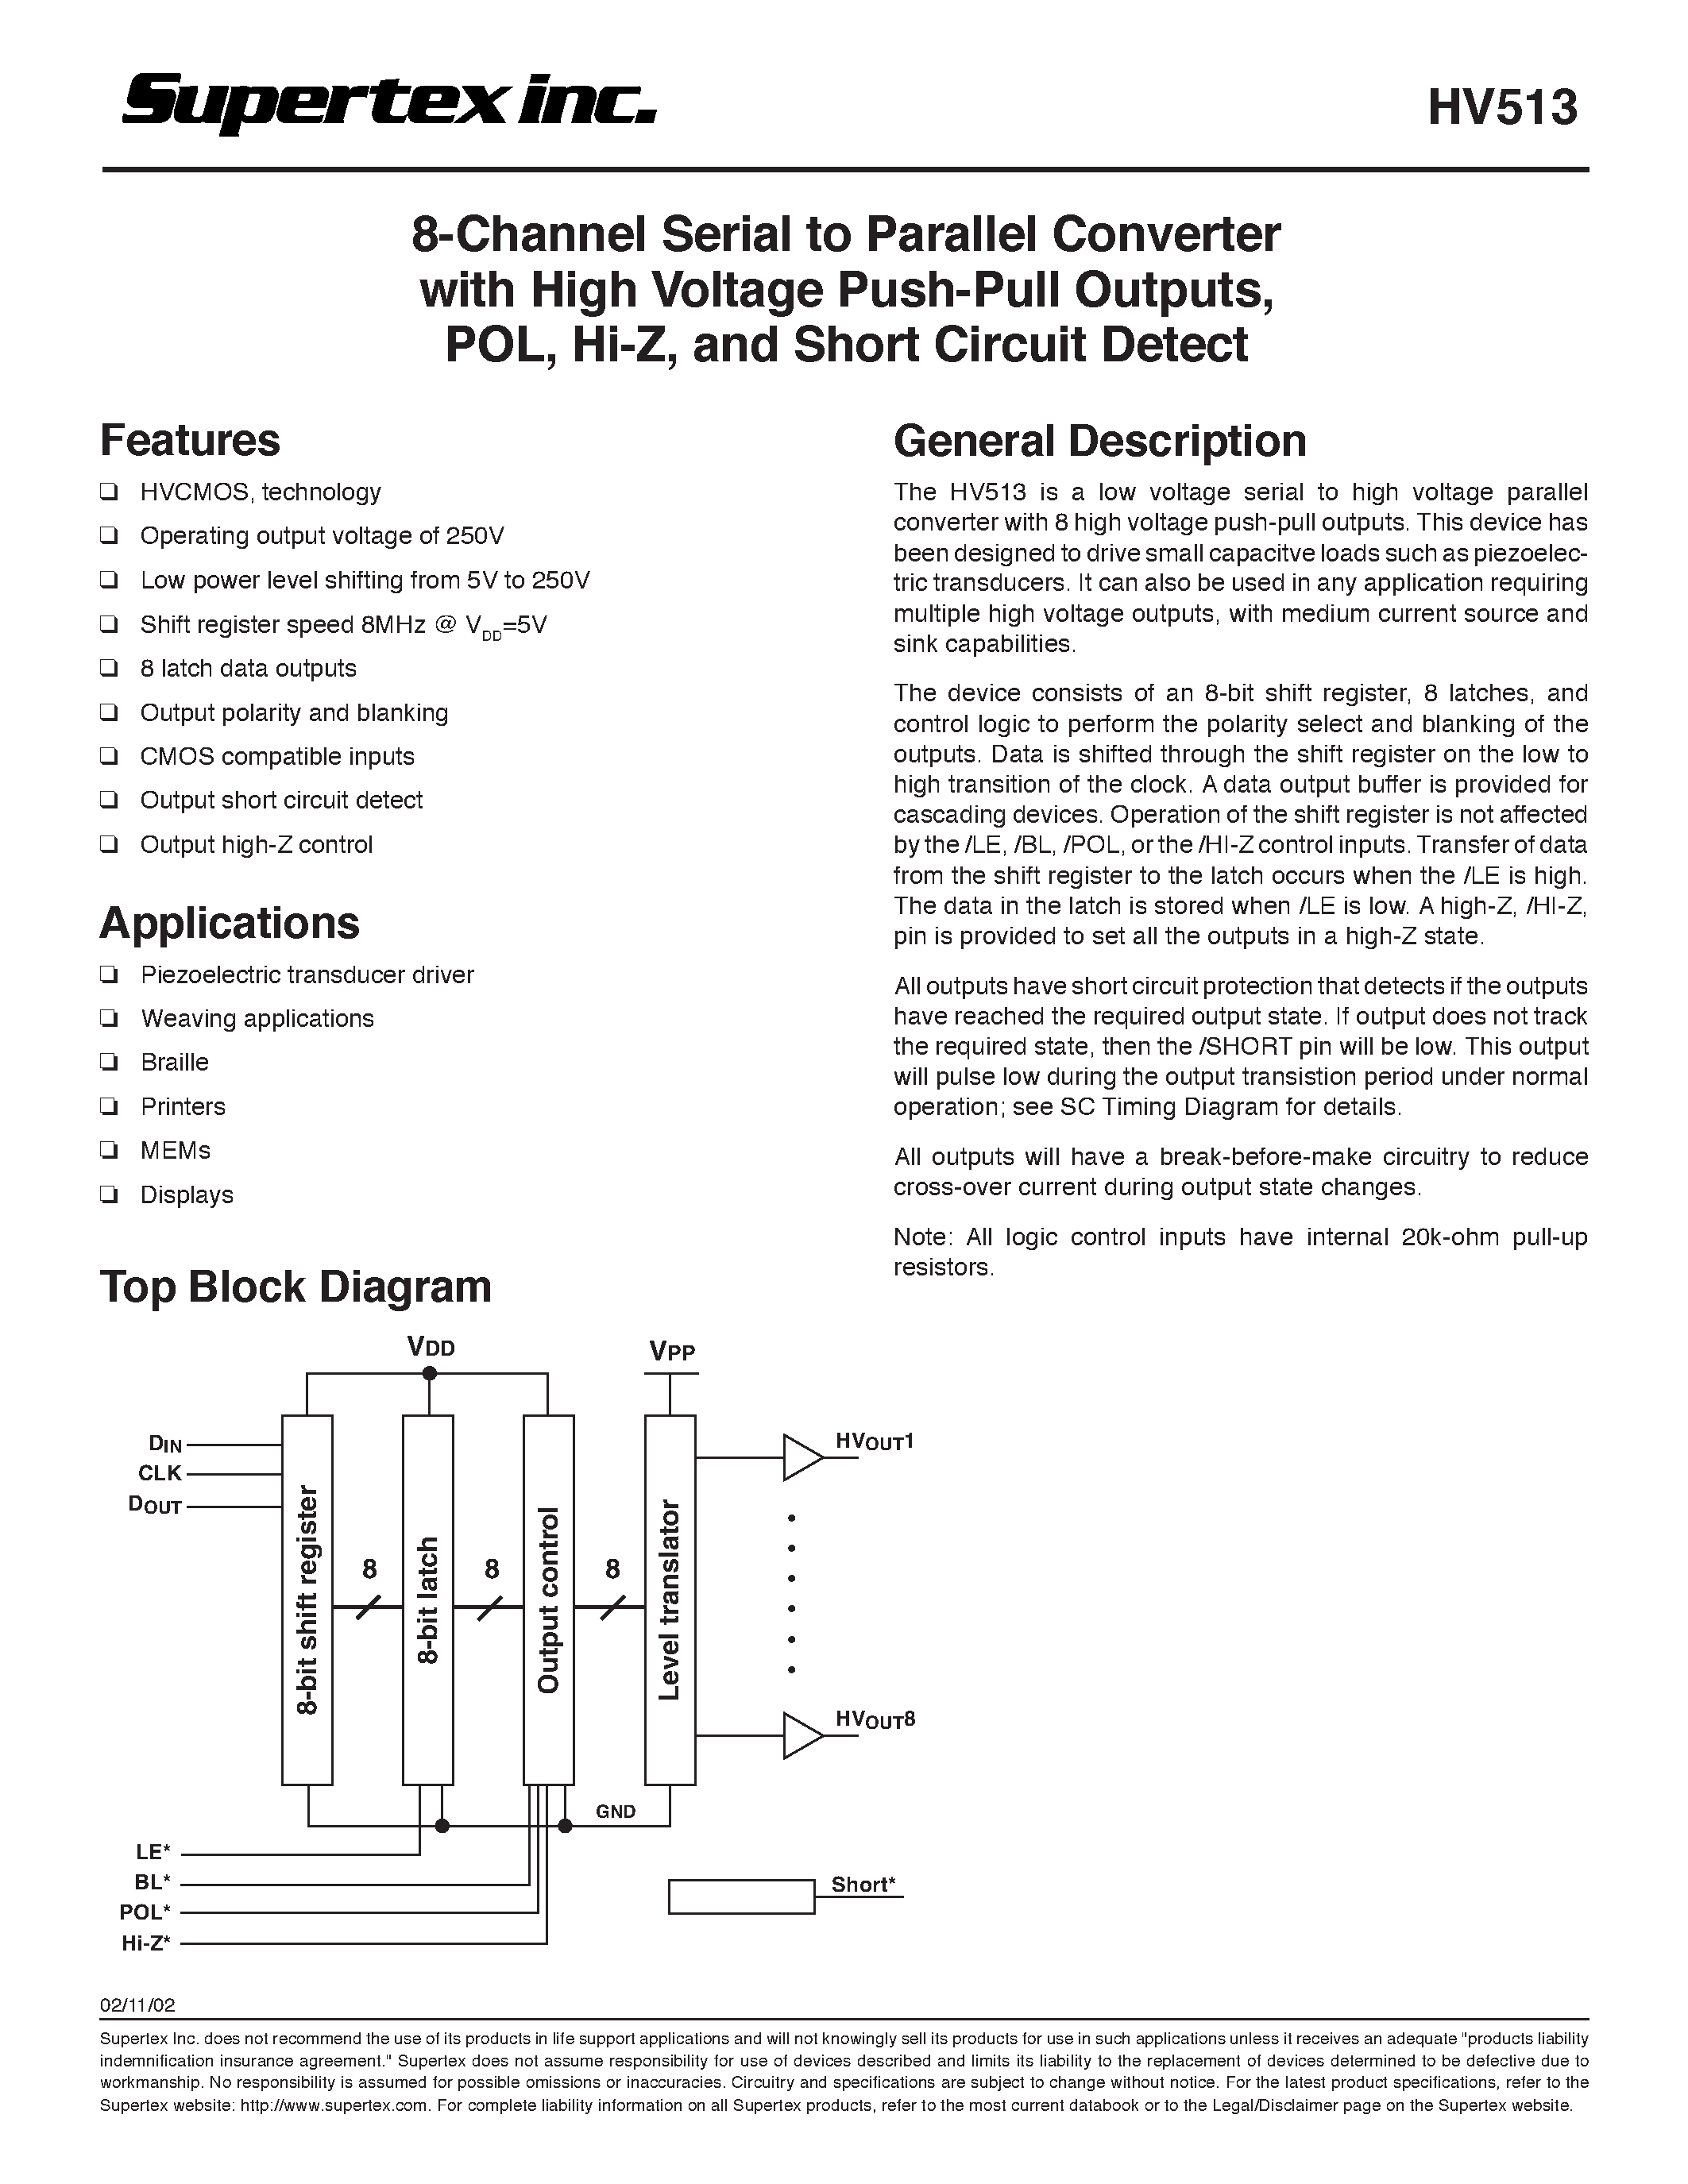 Datasheet HV513 - 8-Channel Serial to Parallel Converter with High Voltage Push-Pull Outputs/ POL/ Hi-Z/ and Short Circuit Detect page 1